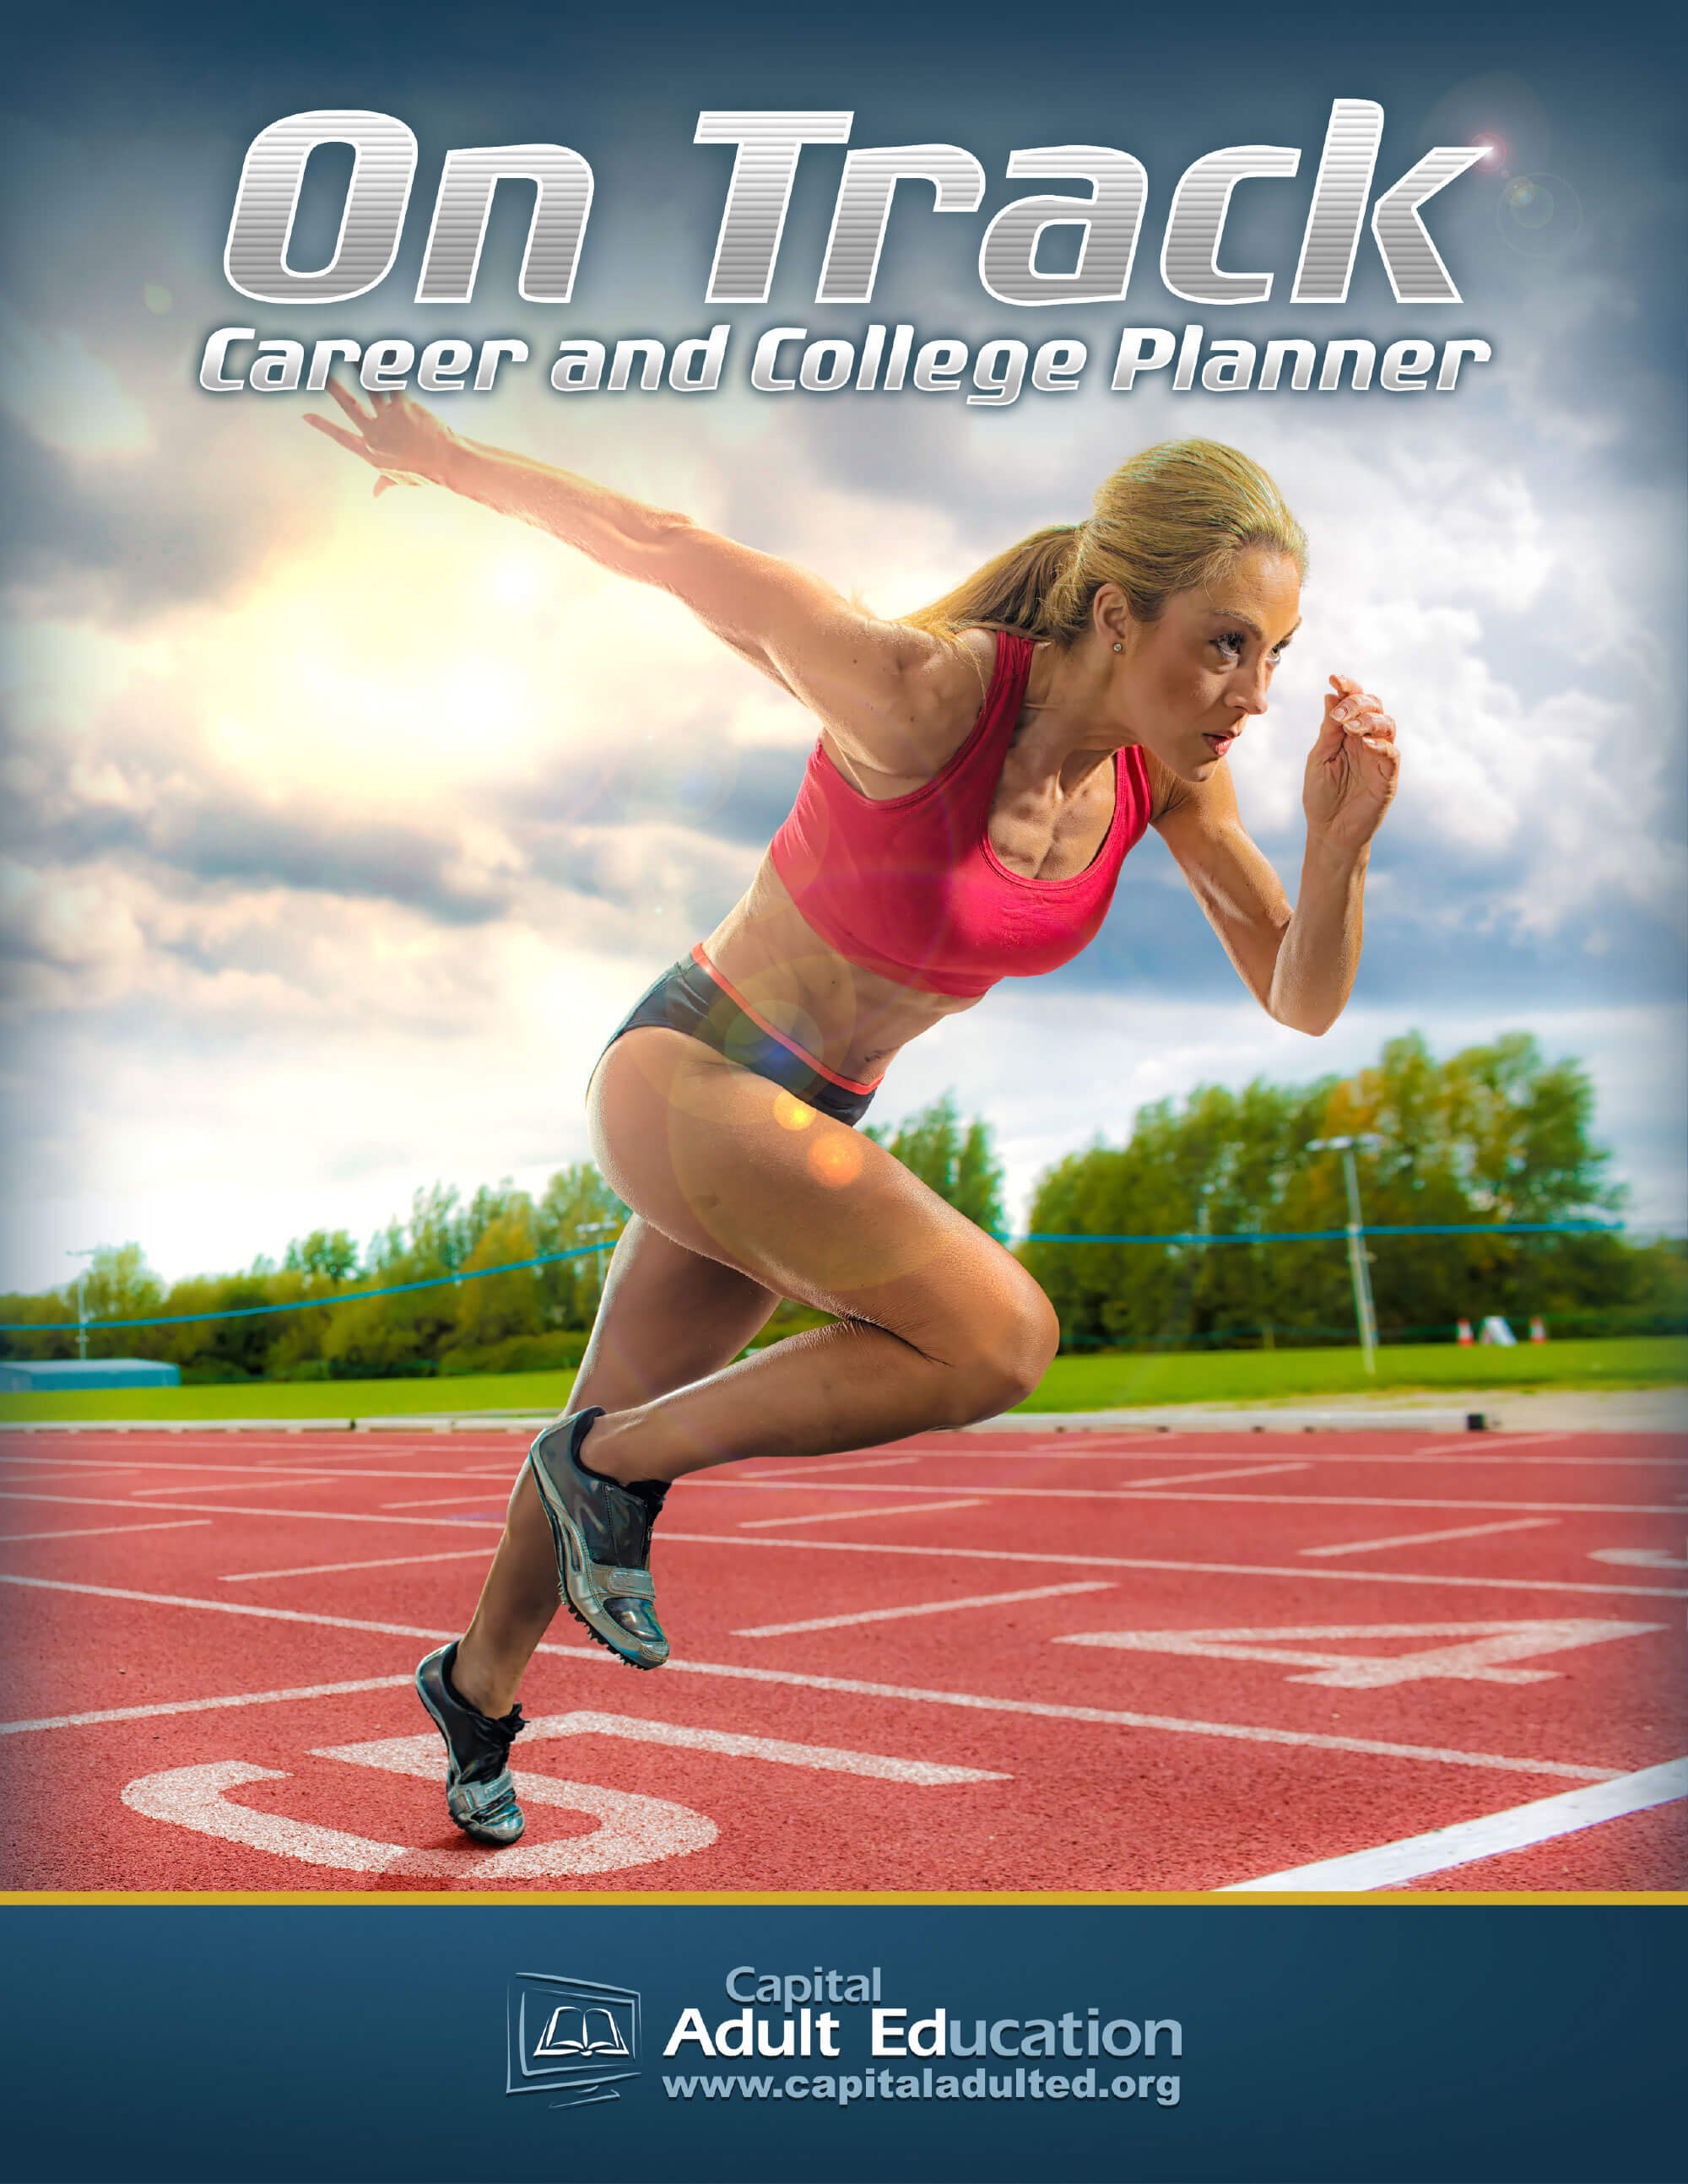 On Track Career and College Planner